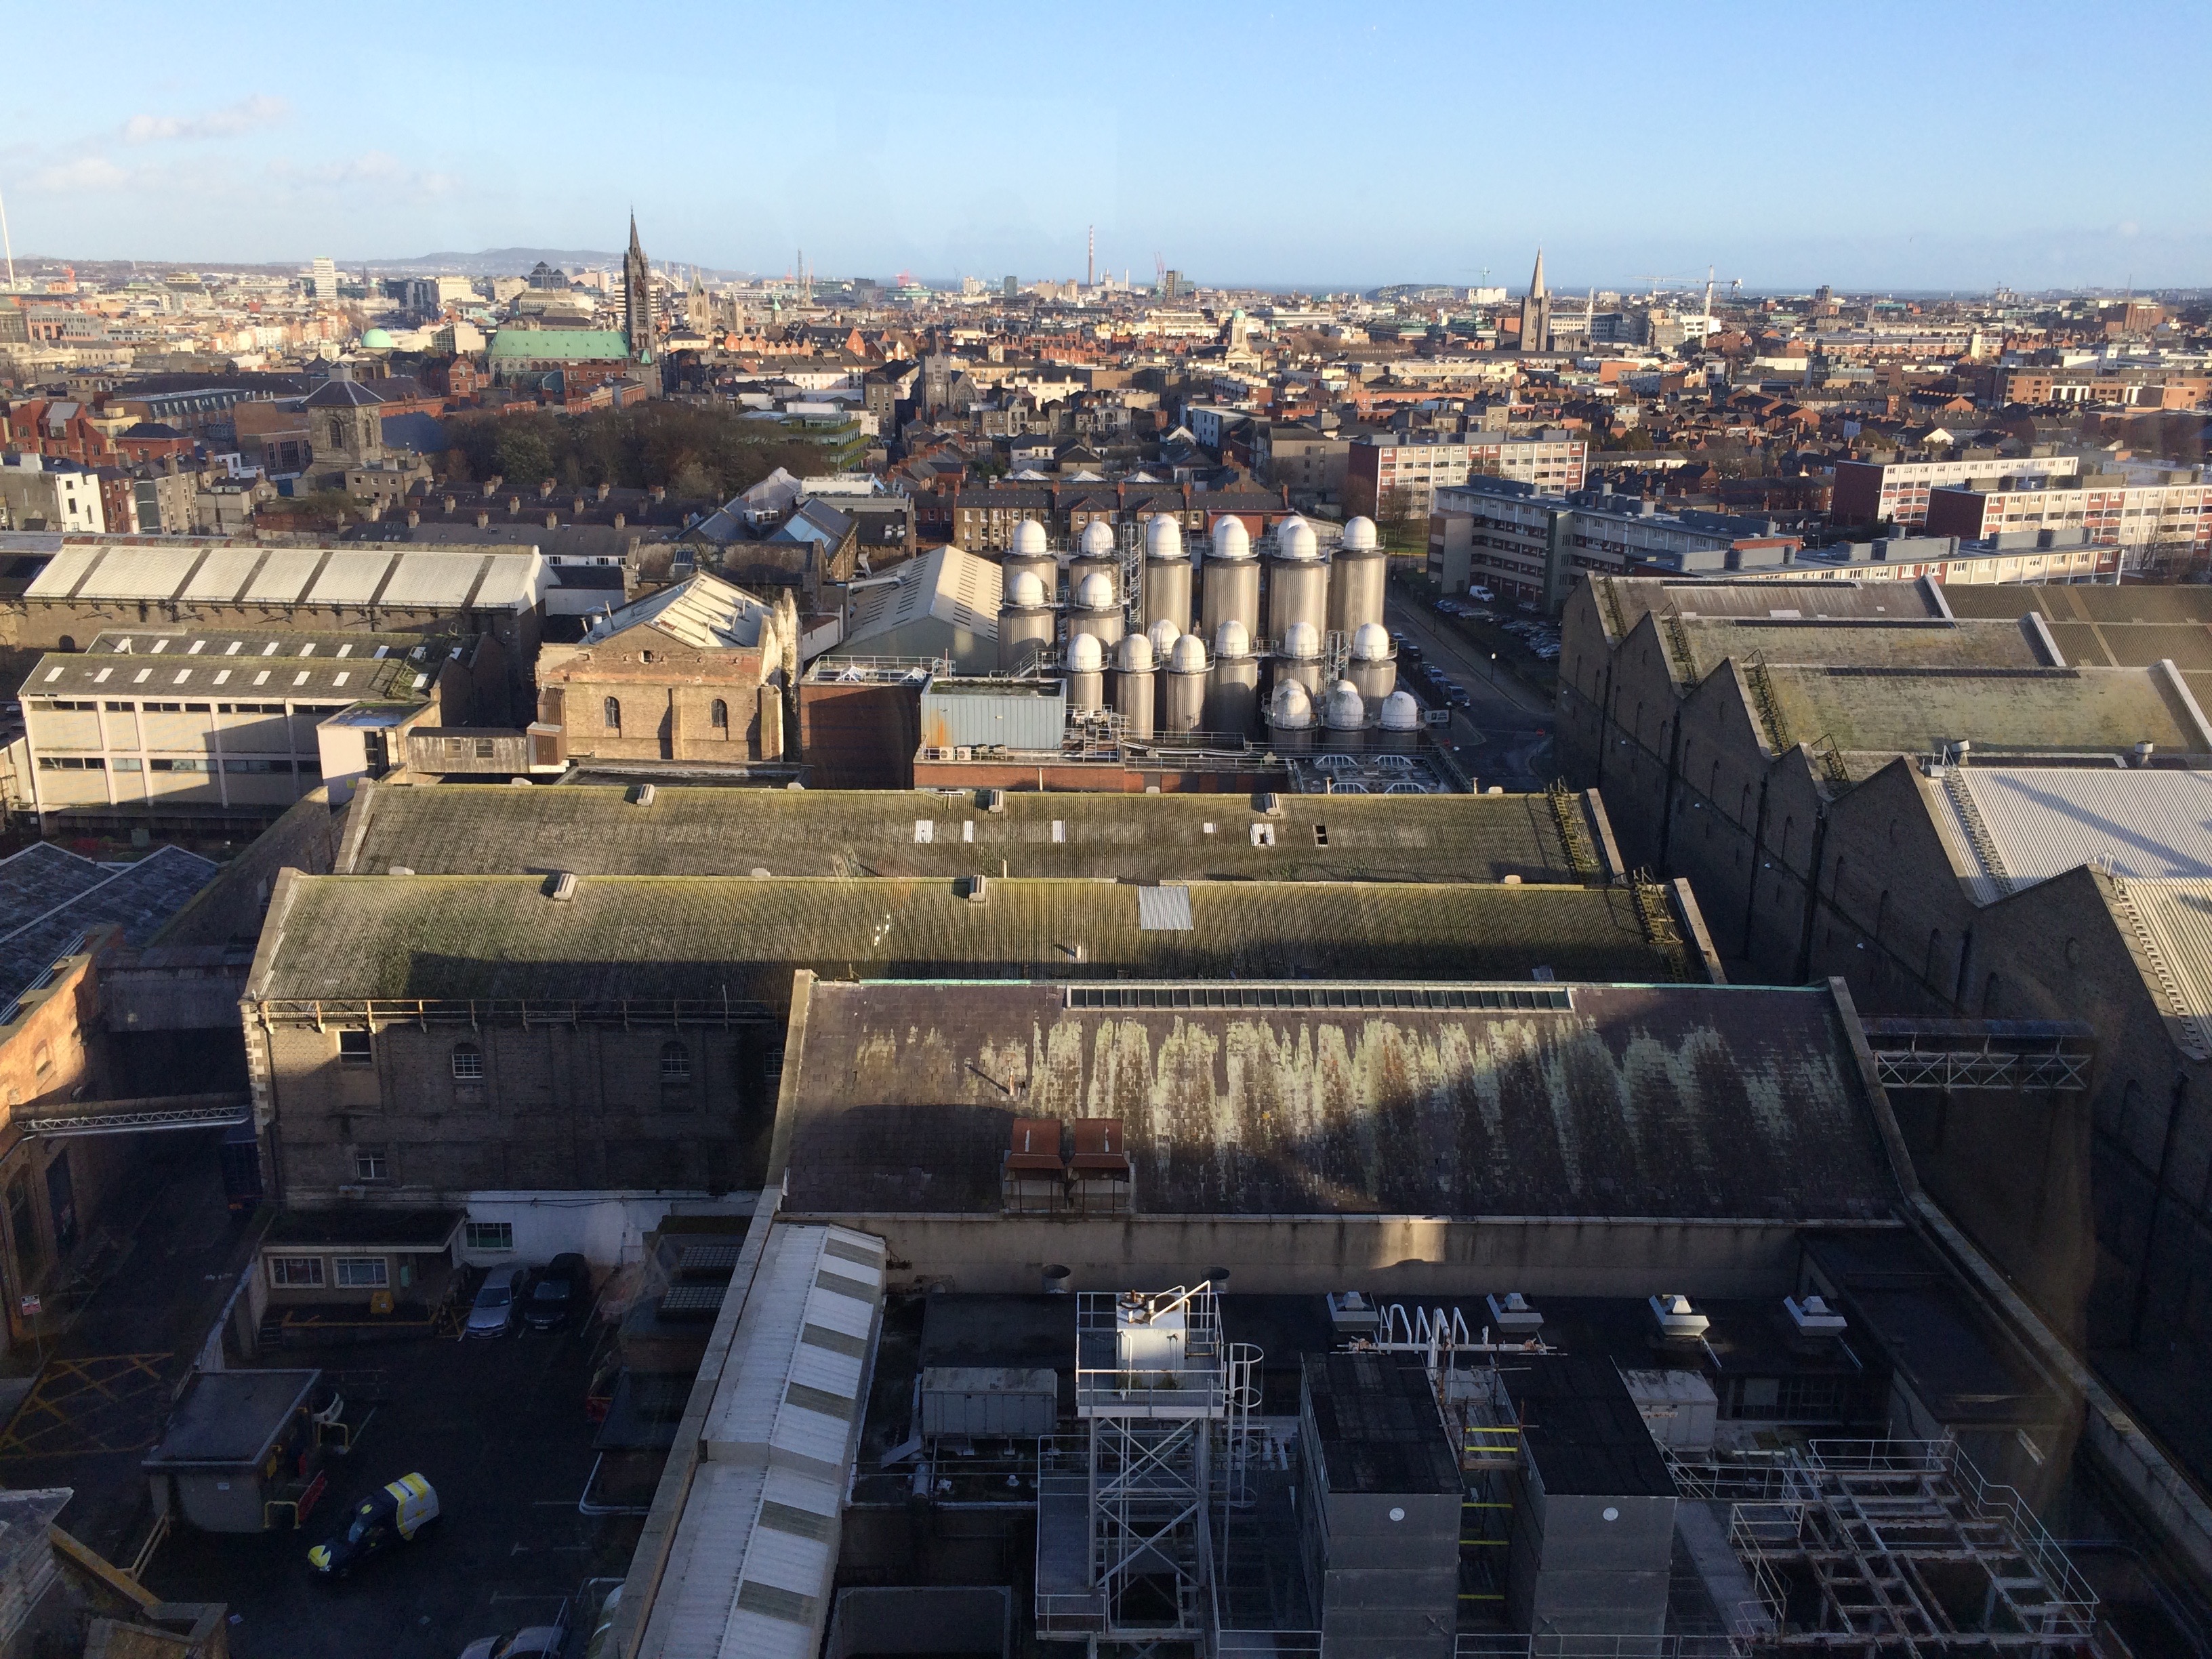 Looking over the Guinness Brewery from the Gravity Bar.